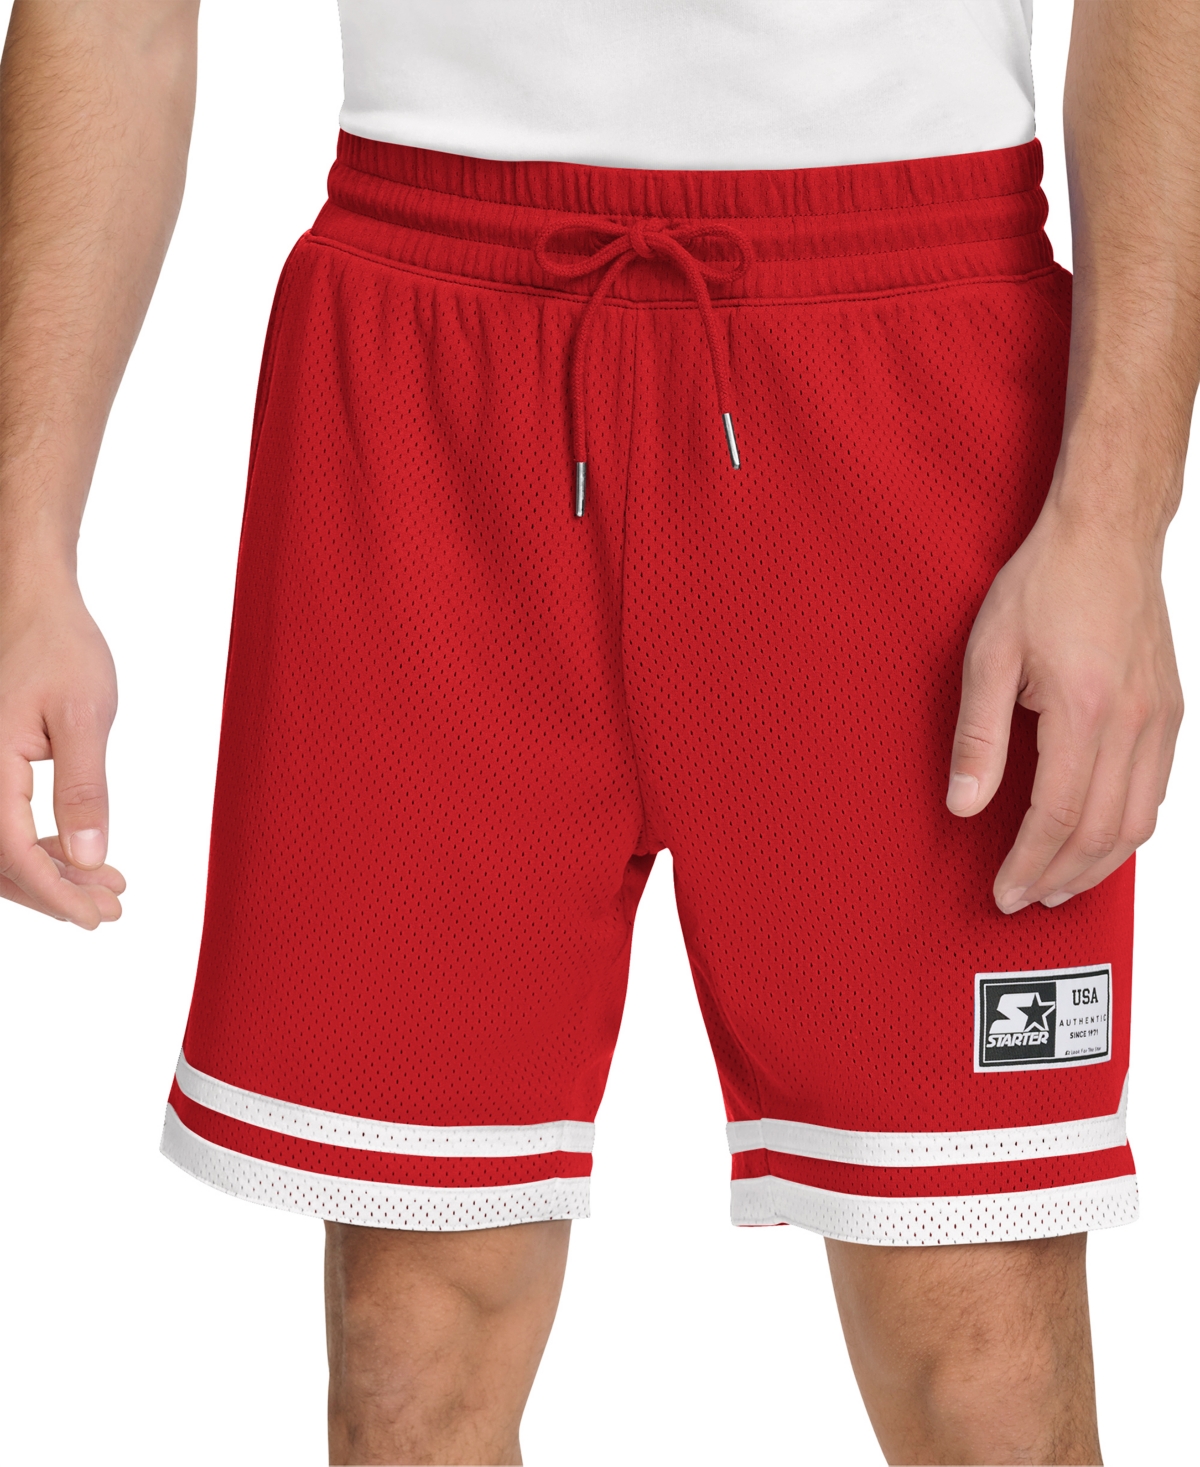 Men's Classic-Fit 8" Mesh Basketball Shorts - Red